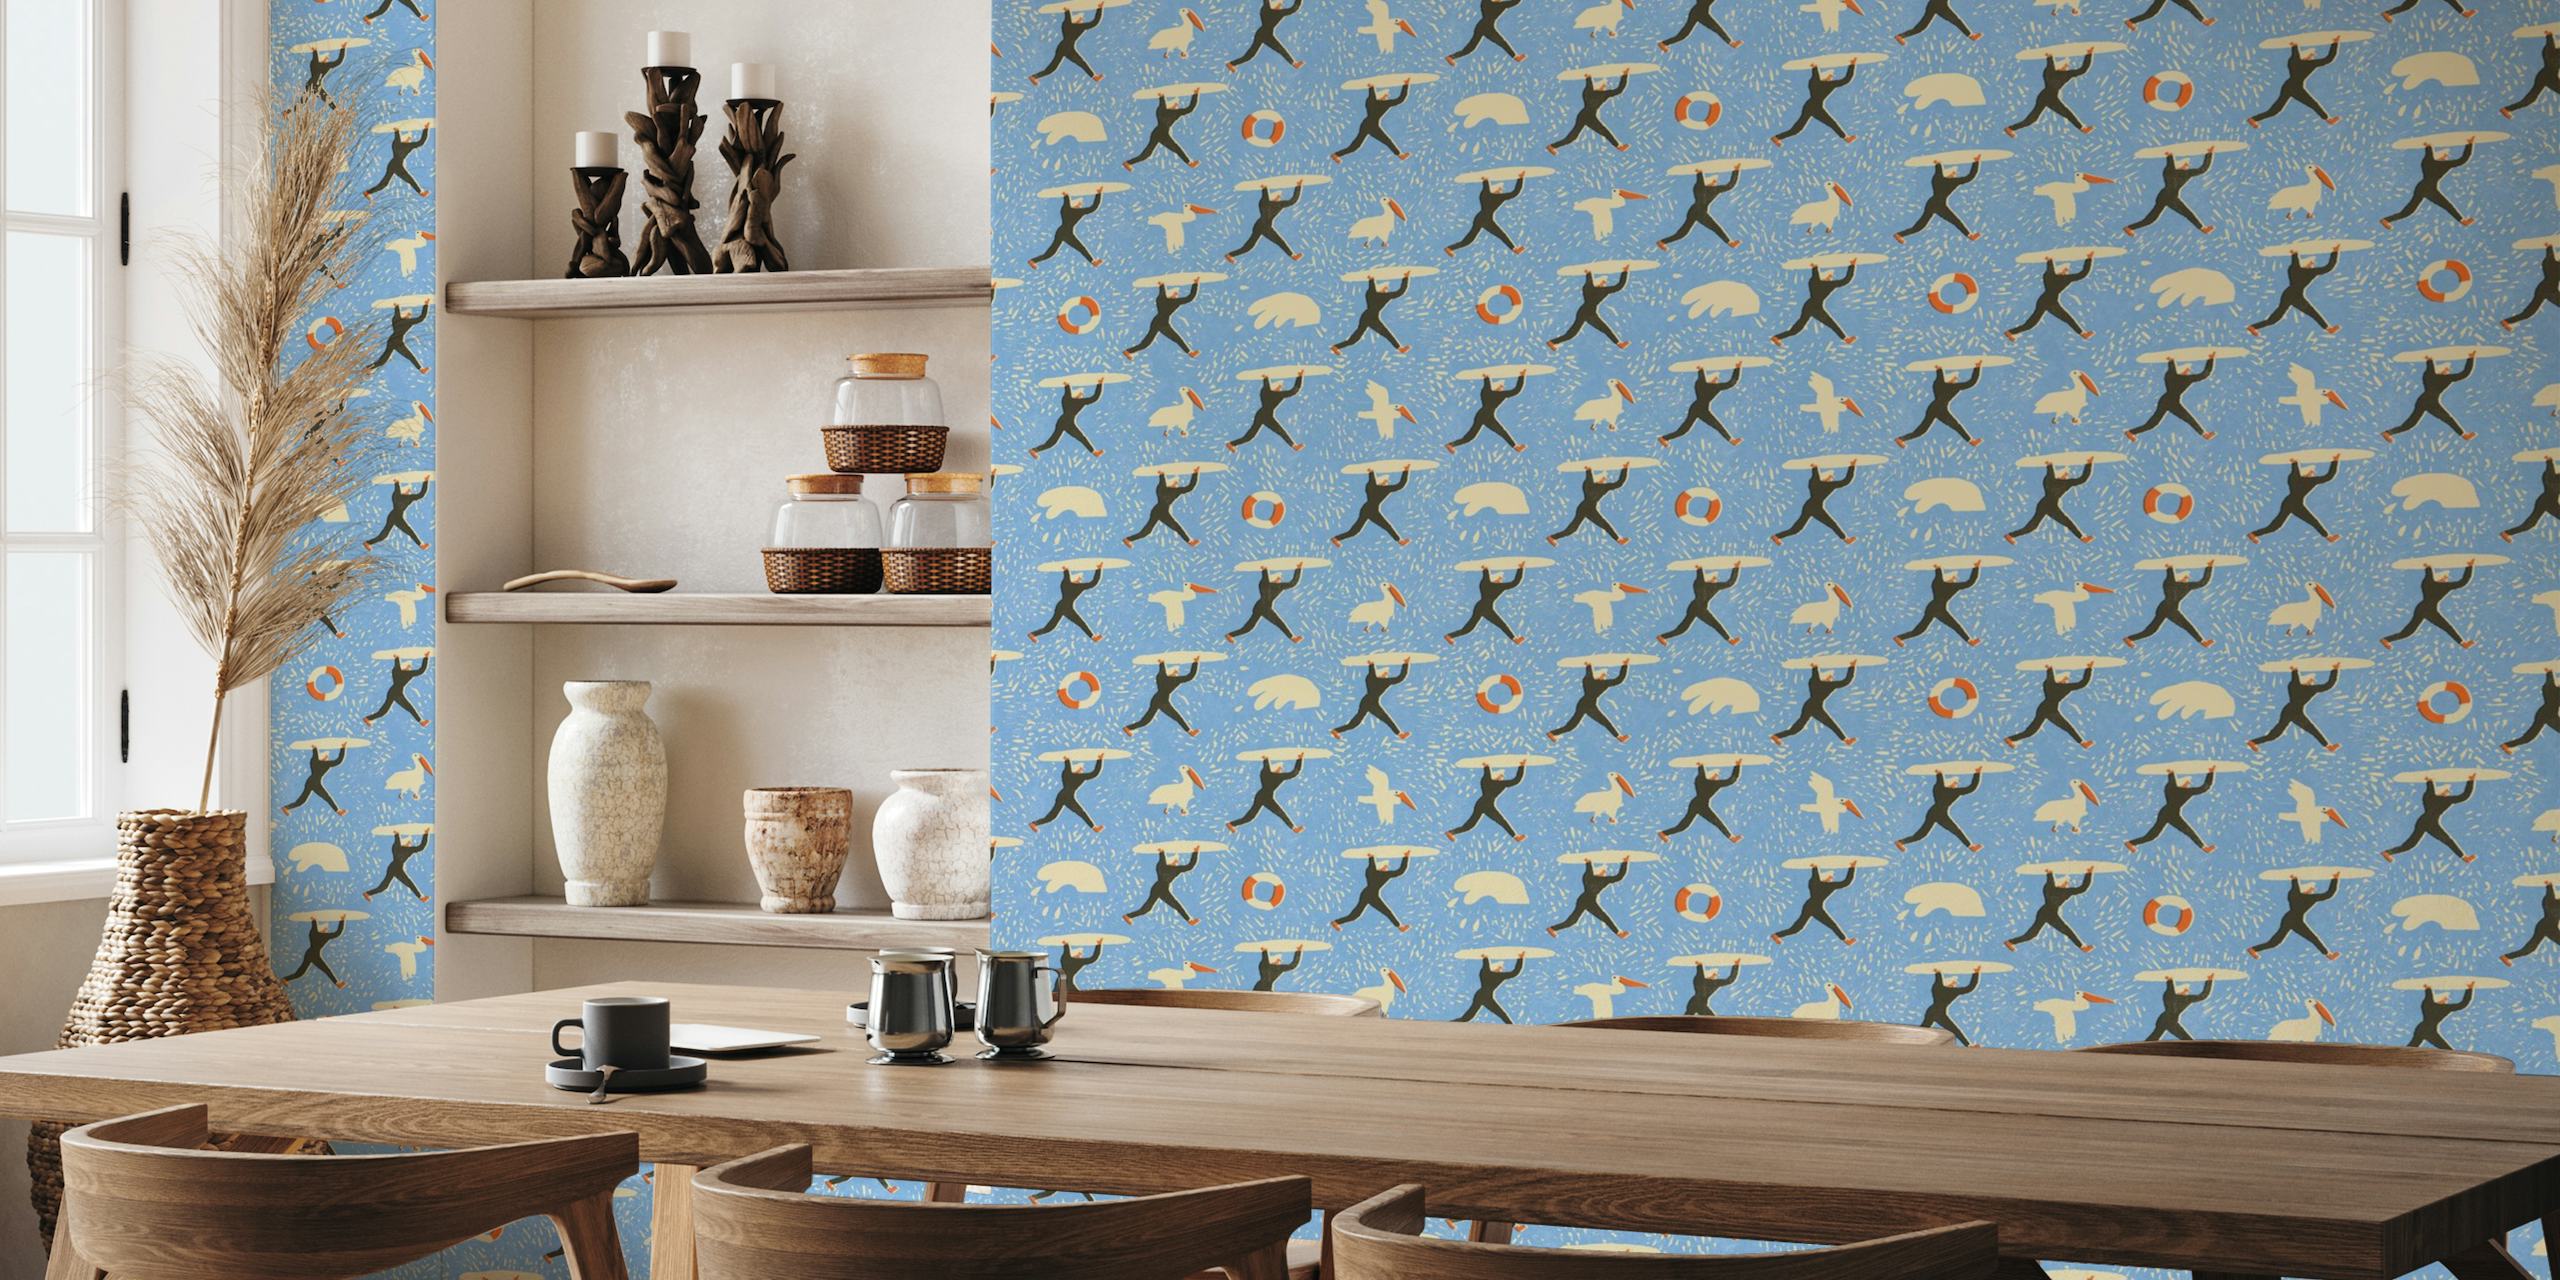 Surfer and seagull patterned wall mural with a cool blue oceanic background